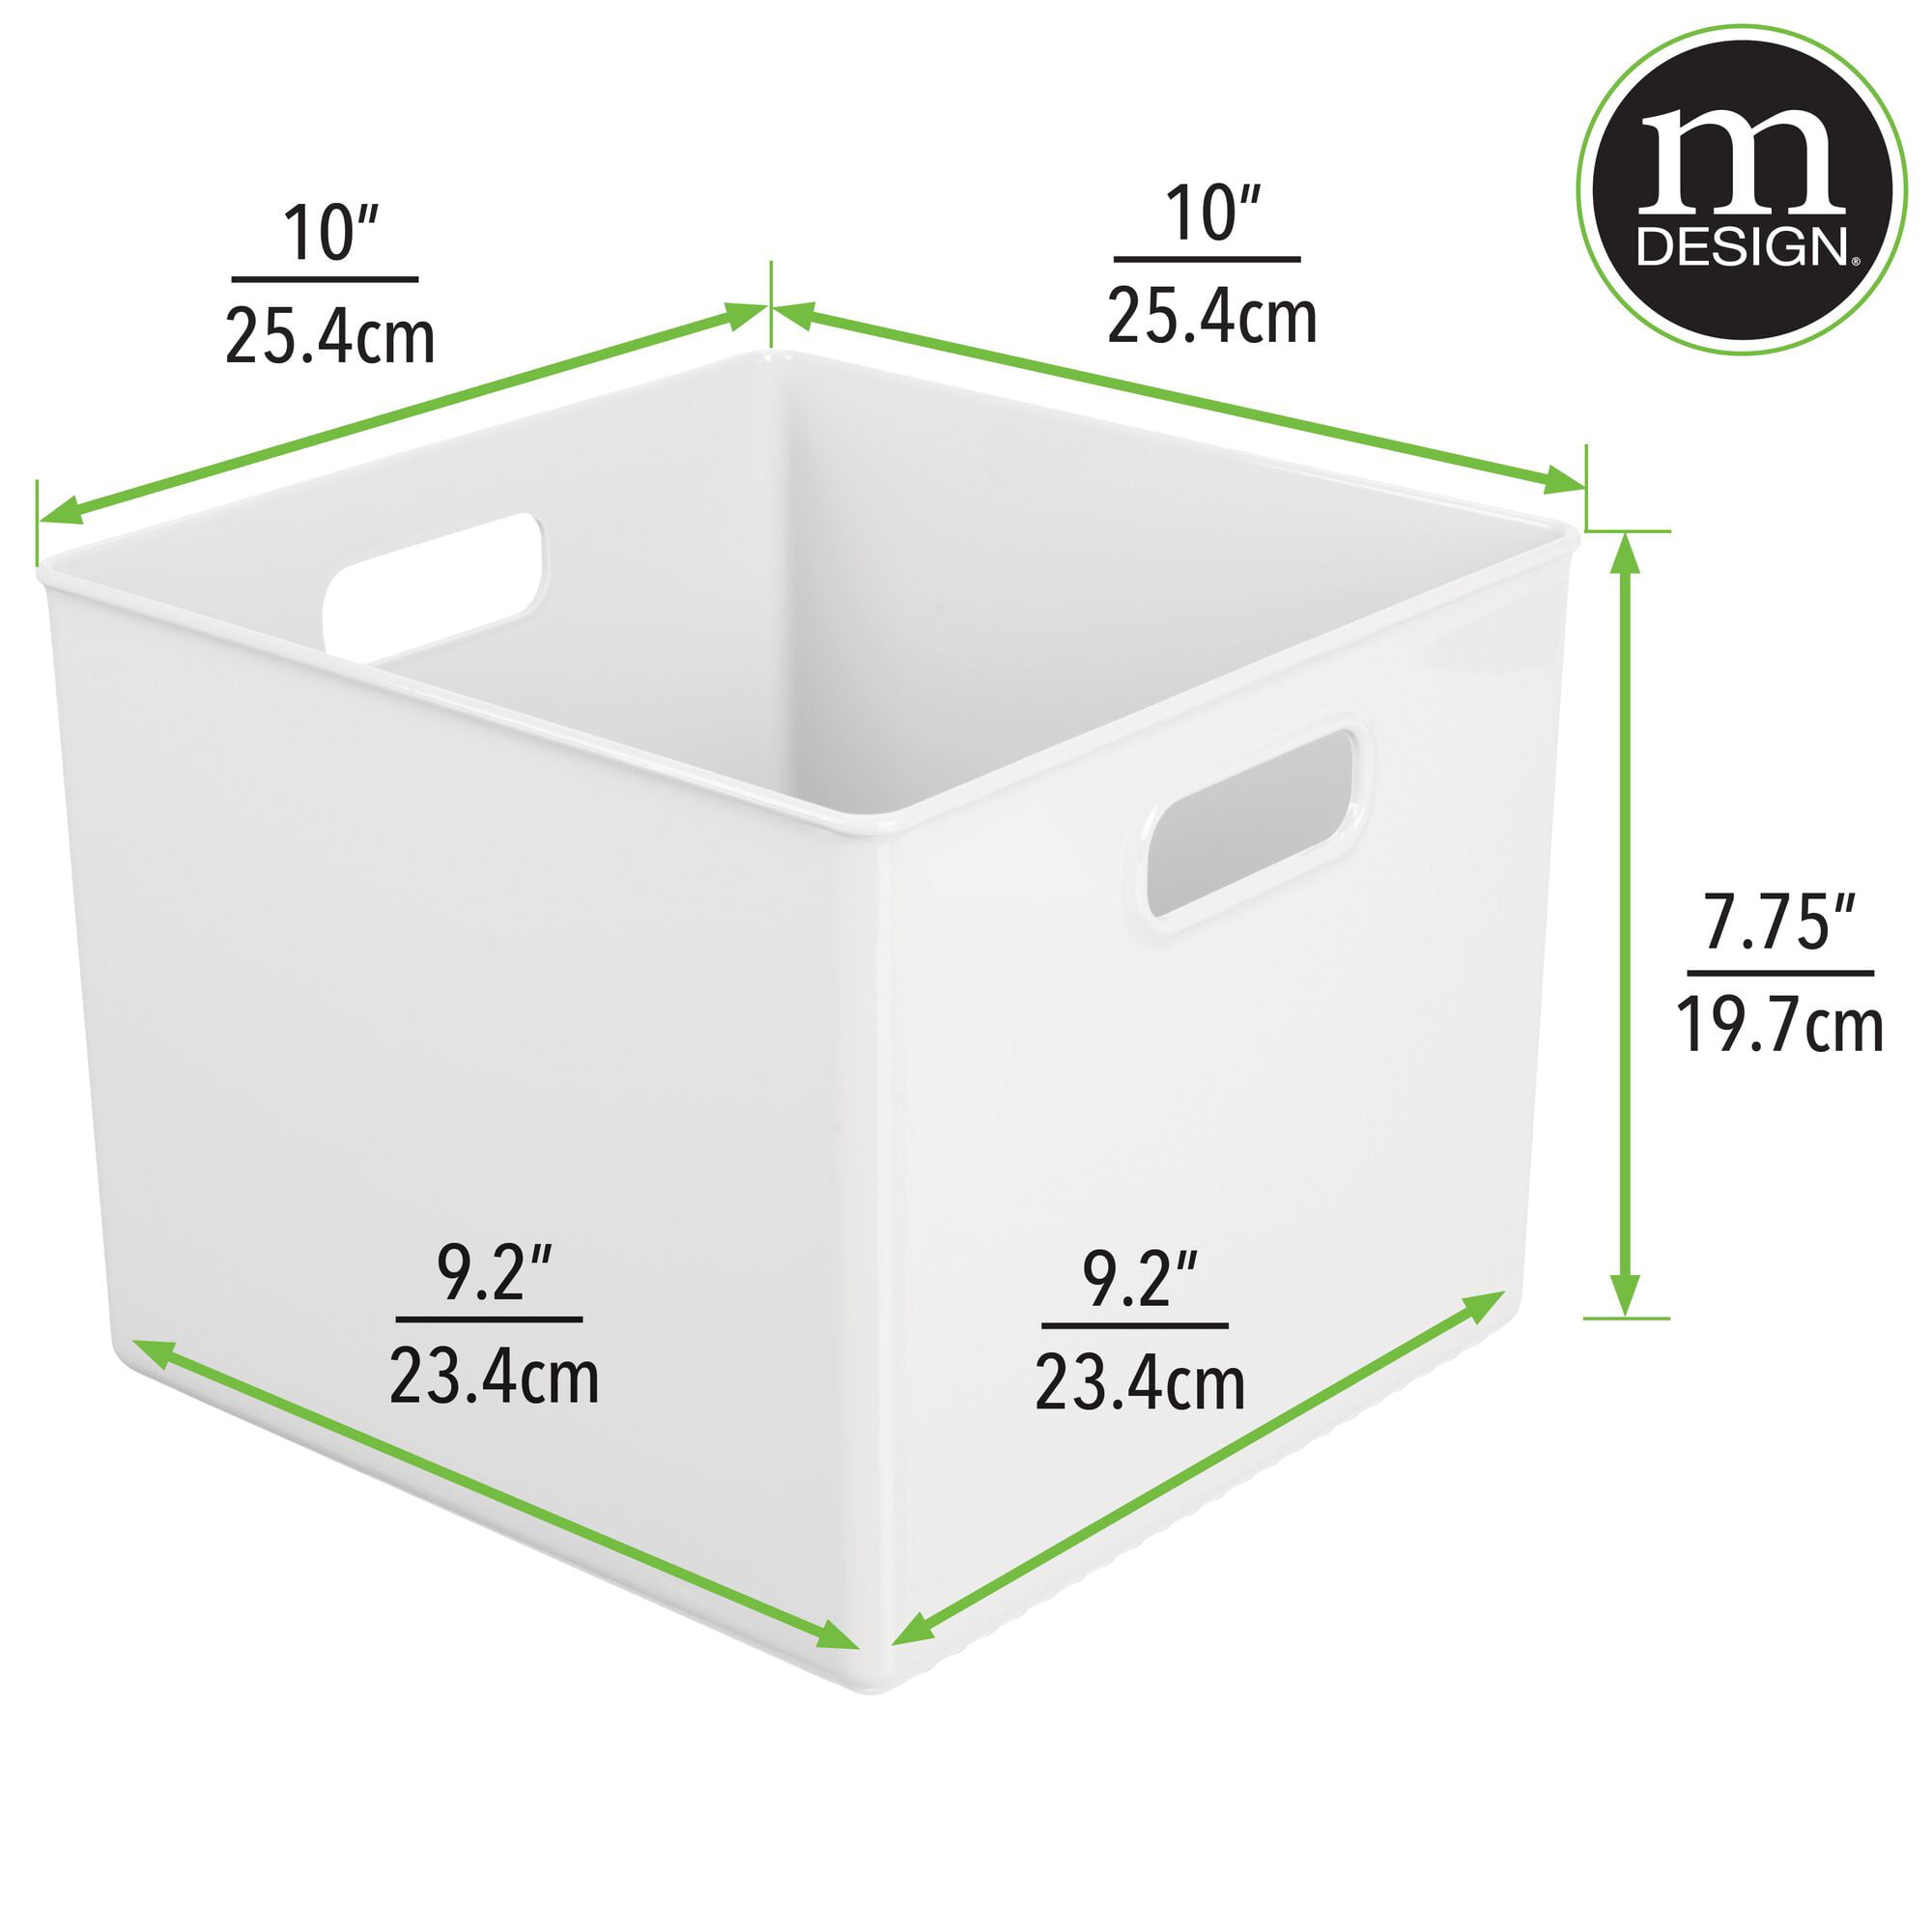 mDesign Small Modern Plastic Storage Organizer Bin Basket with Handle for  Home Office Organization - Shelf, Cubby, Cabinet, and Closet Organizing  Decor - Ligne Collection - 4 Pack - White 